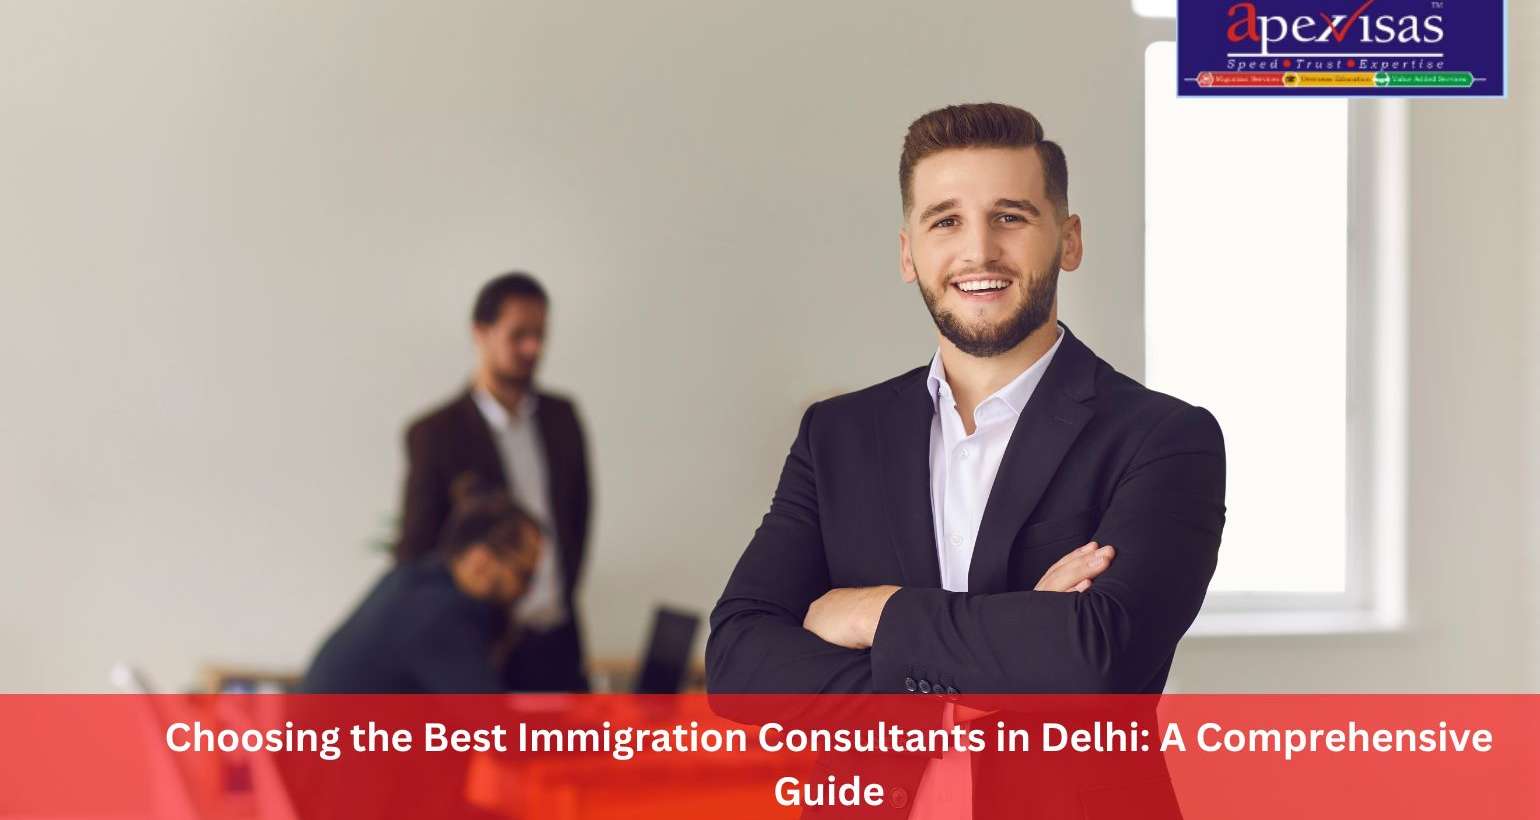 Choosing the Best Immigration Consultants in Delhi: A Comprehensive Guide